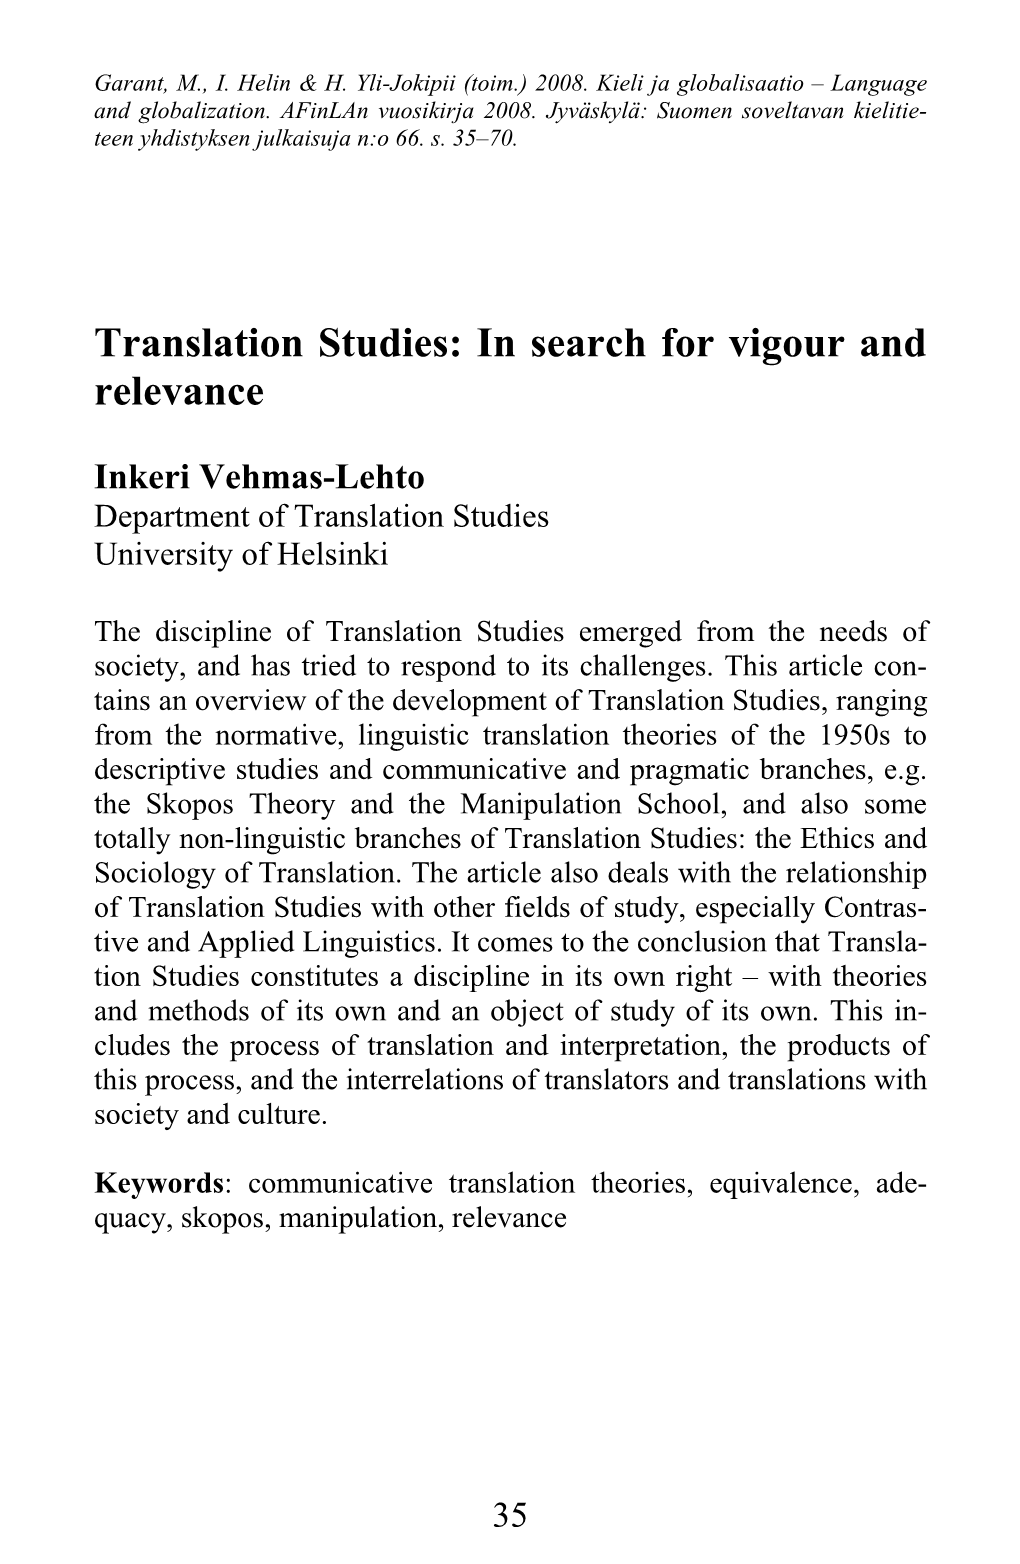 Translation Studies: in Search for Vigour and Relevance